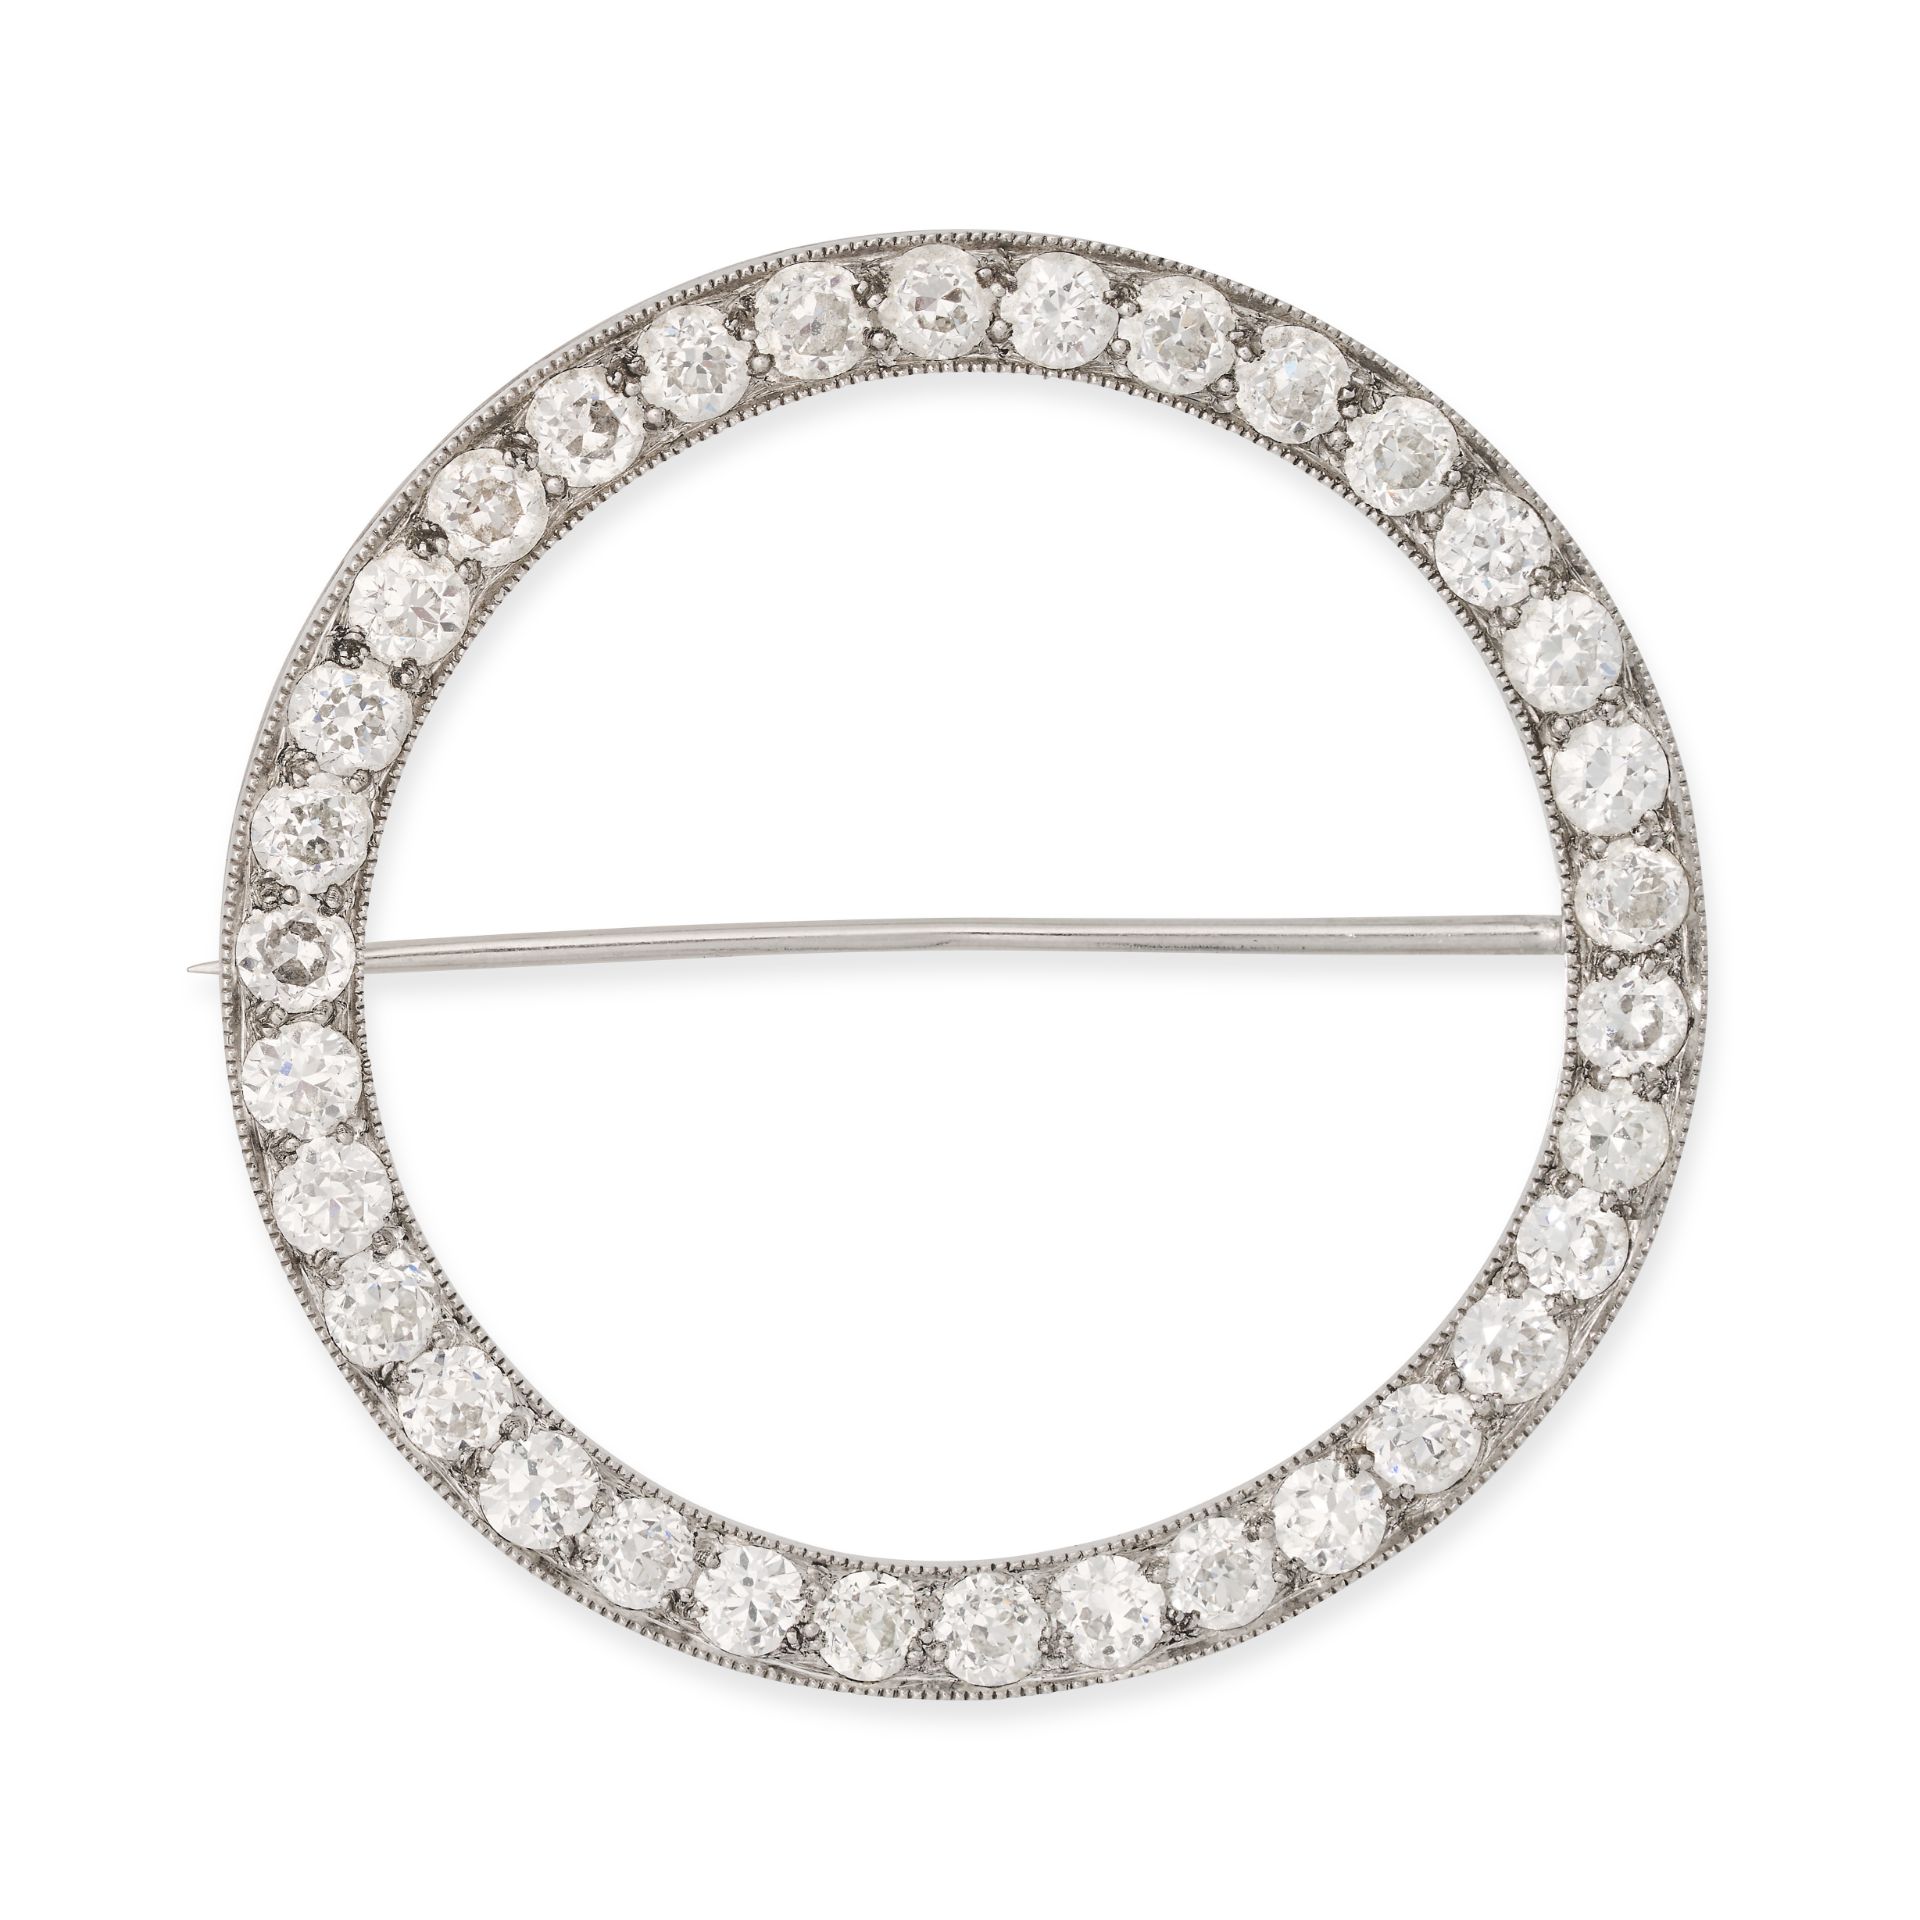 TIFFANY & CO., A DIAMOND CIRCLE BROOCH, 1940S in platinum, designed as an open circle set through...